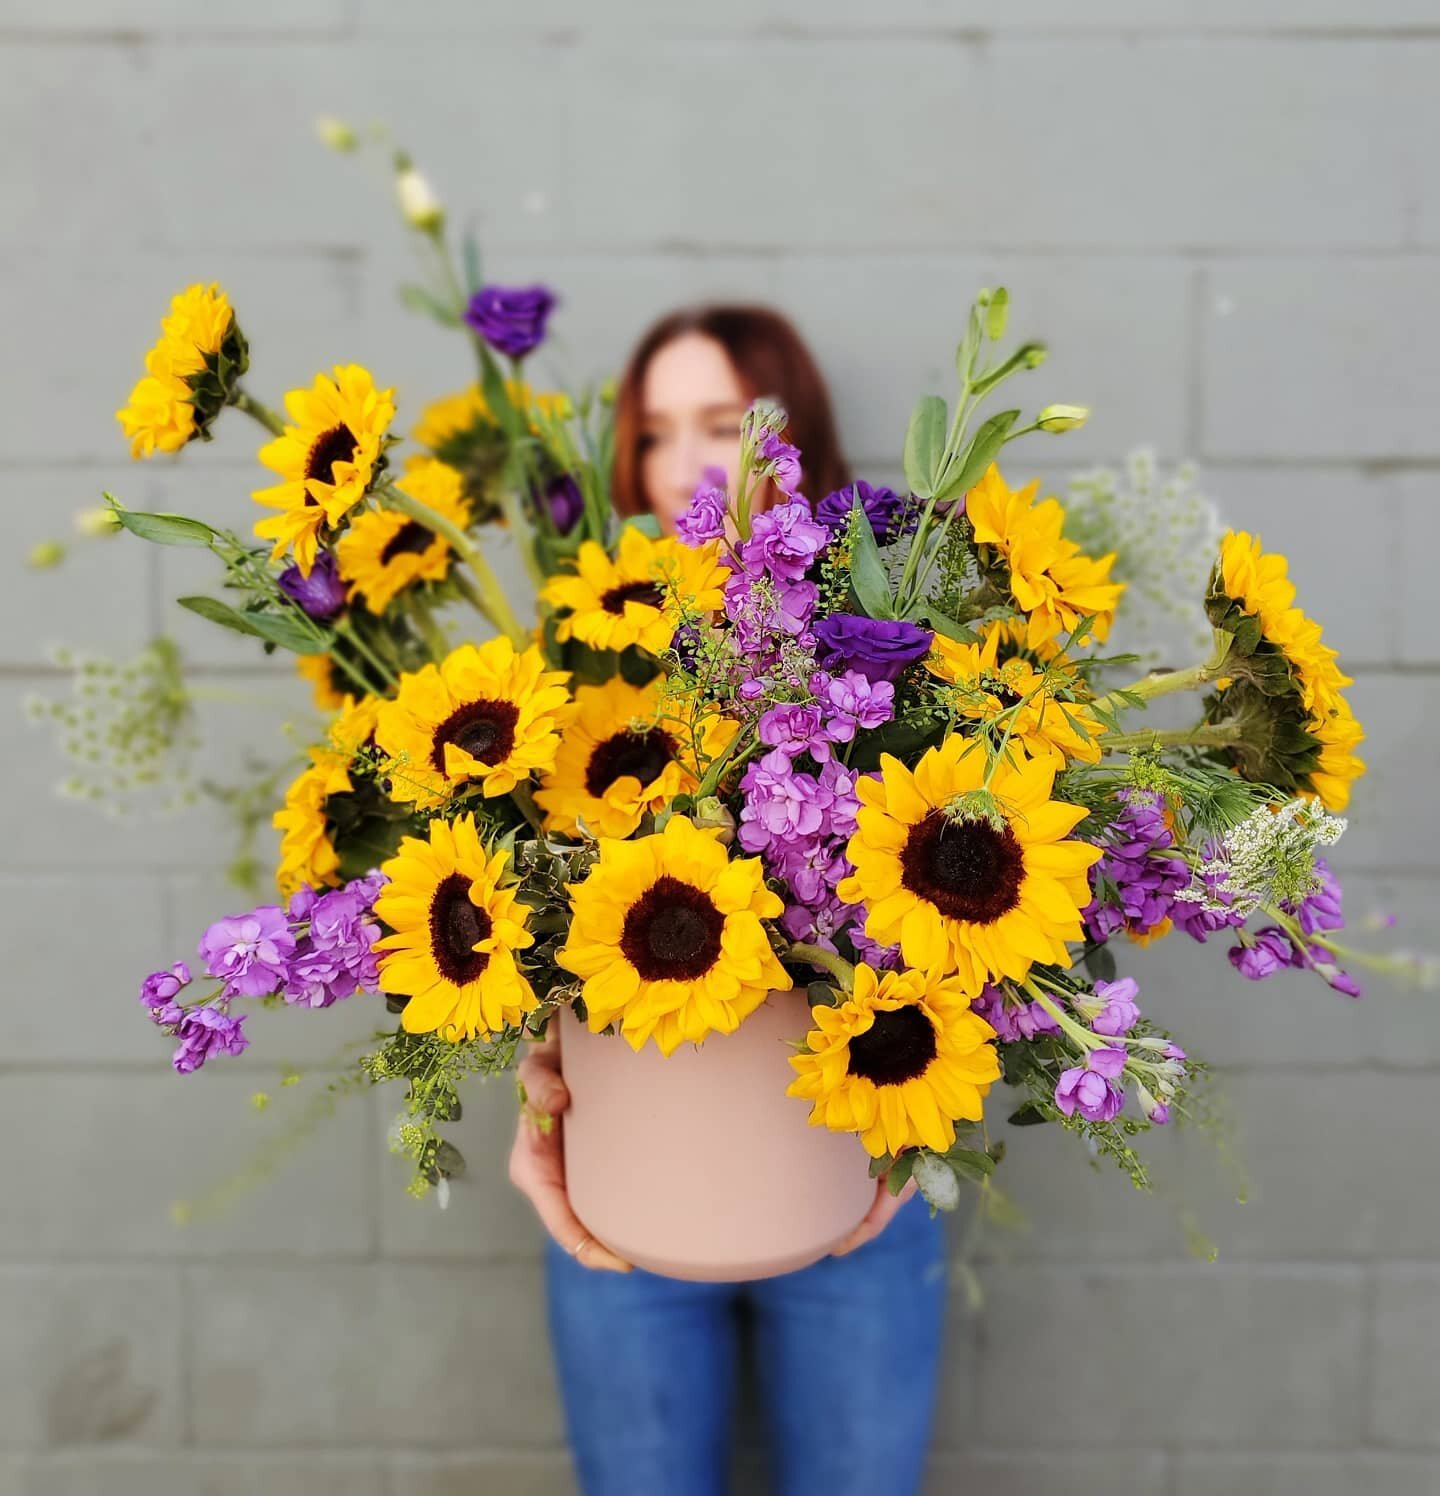 A surefire way to brighten someone's day! Who can resist a vase full of bright and happy sunflowers!? 
Call us and let us help you make someones day! 
.
.
☎️936-328-5683 
💻www.petalzbyannie.com 
.
.
#floraldesign #floral #design #floristsofinstagram